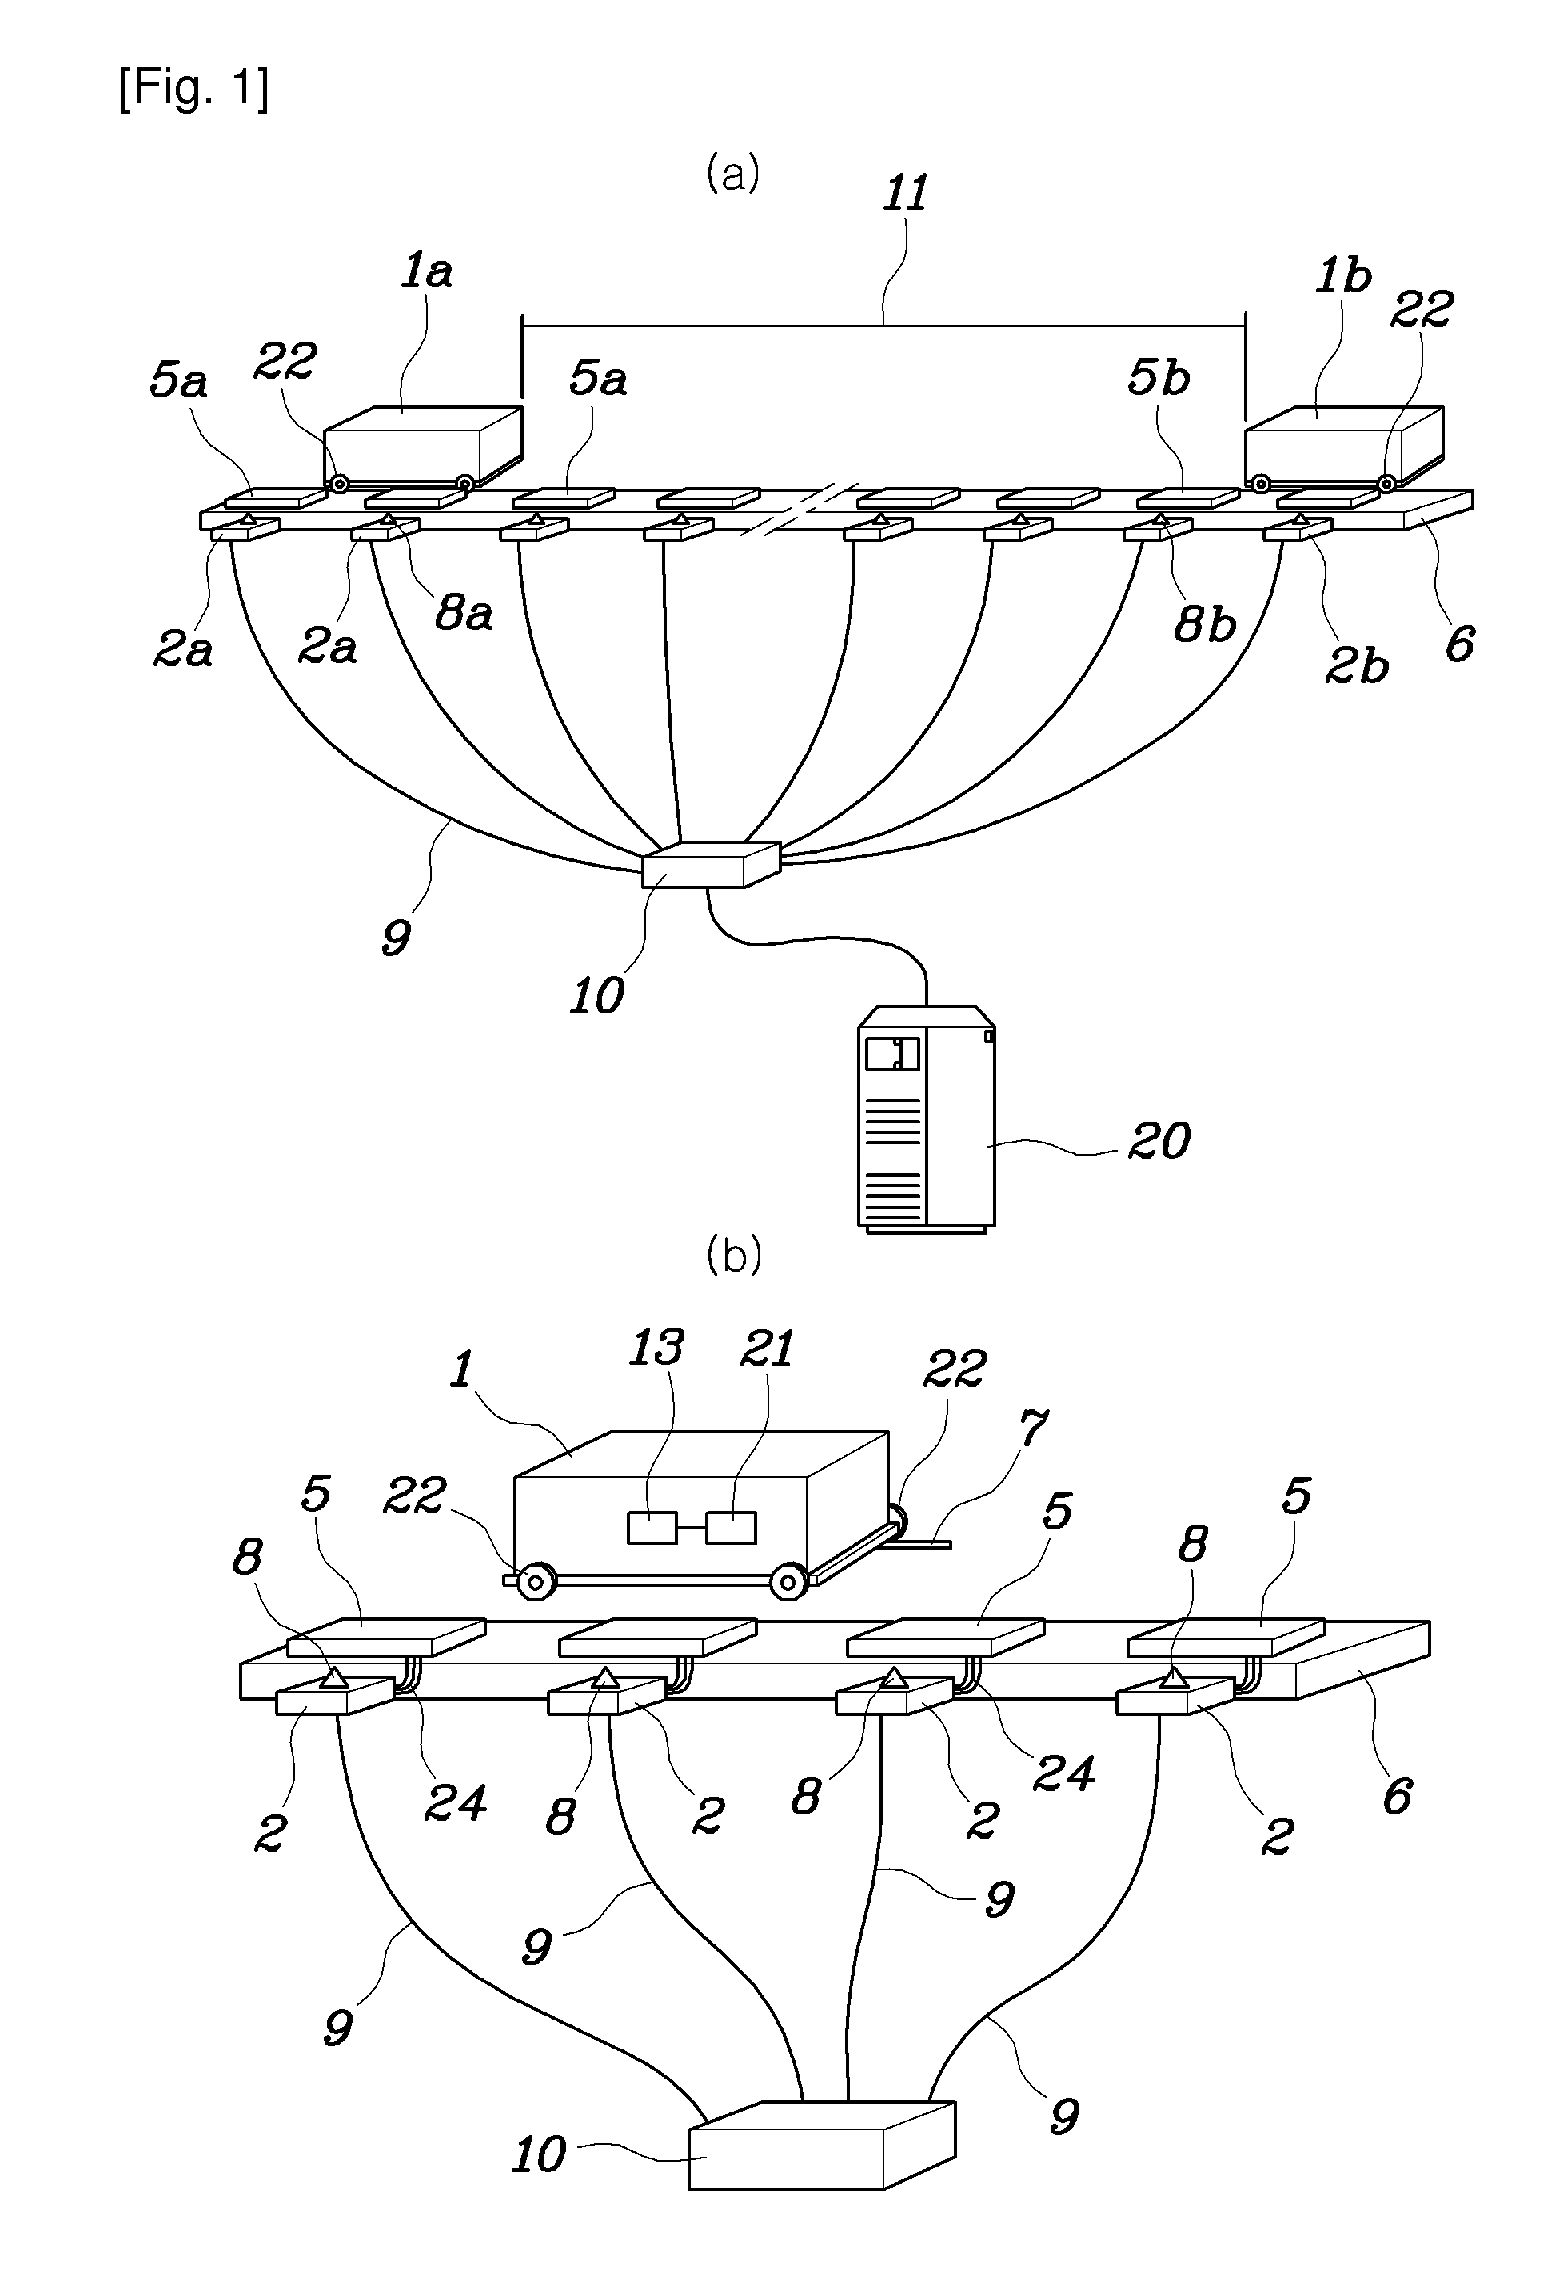 Method for Platooning of Vehicles in an Automated Vehicle System